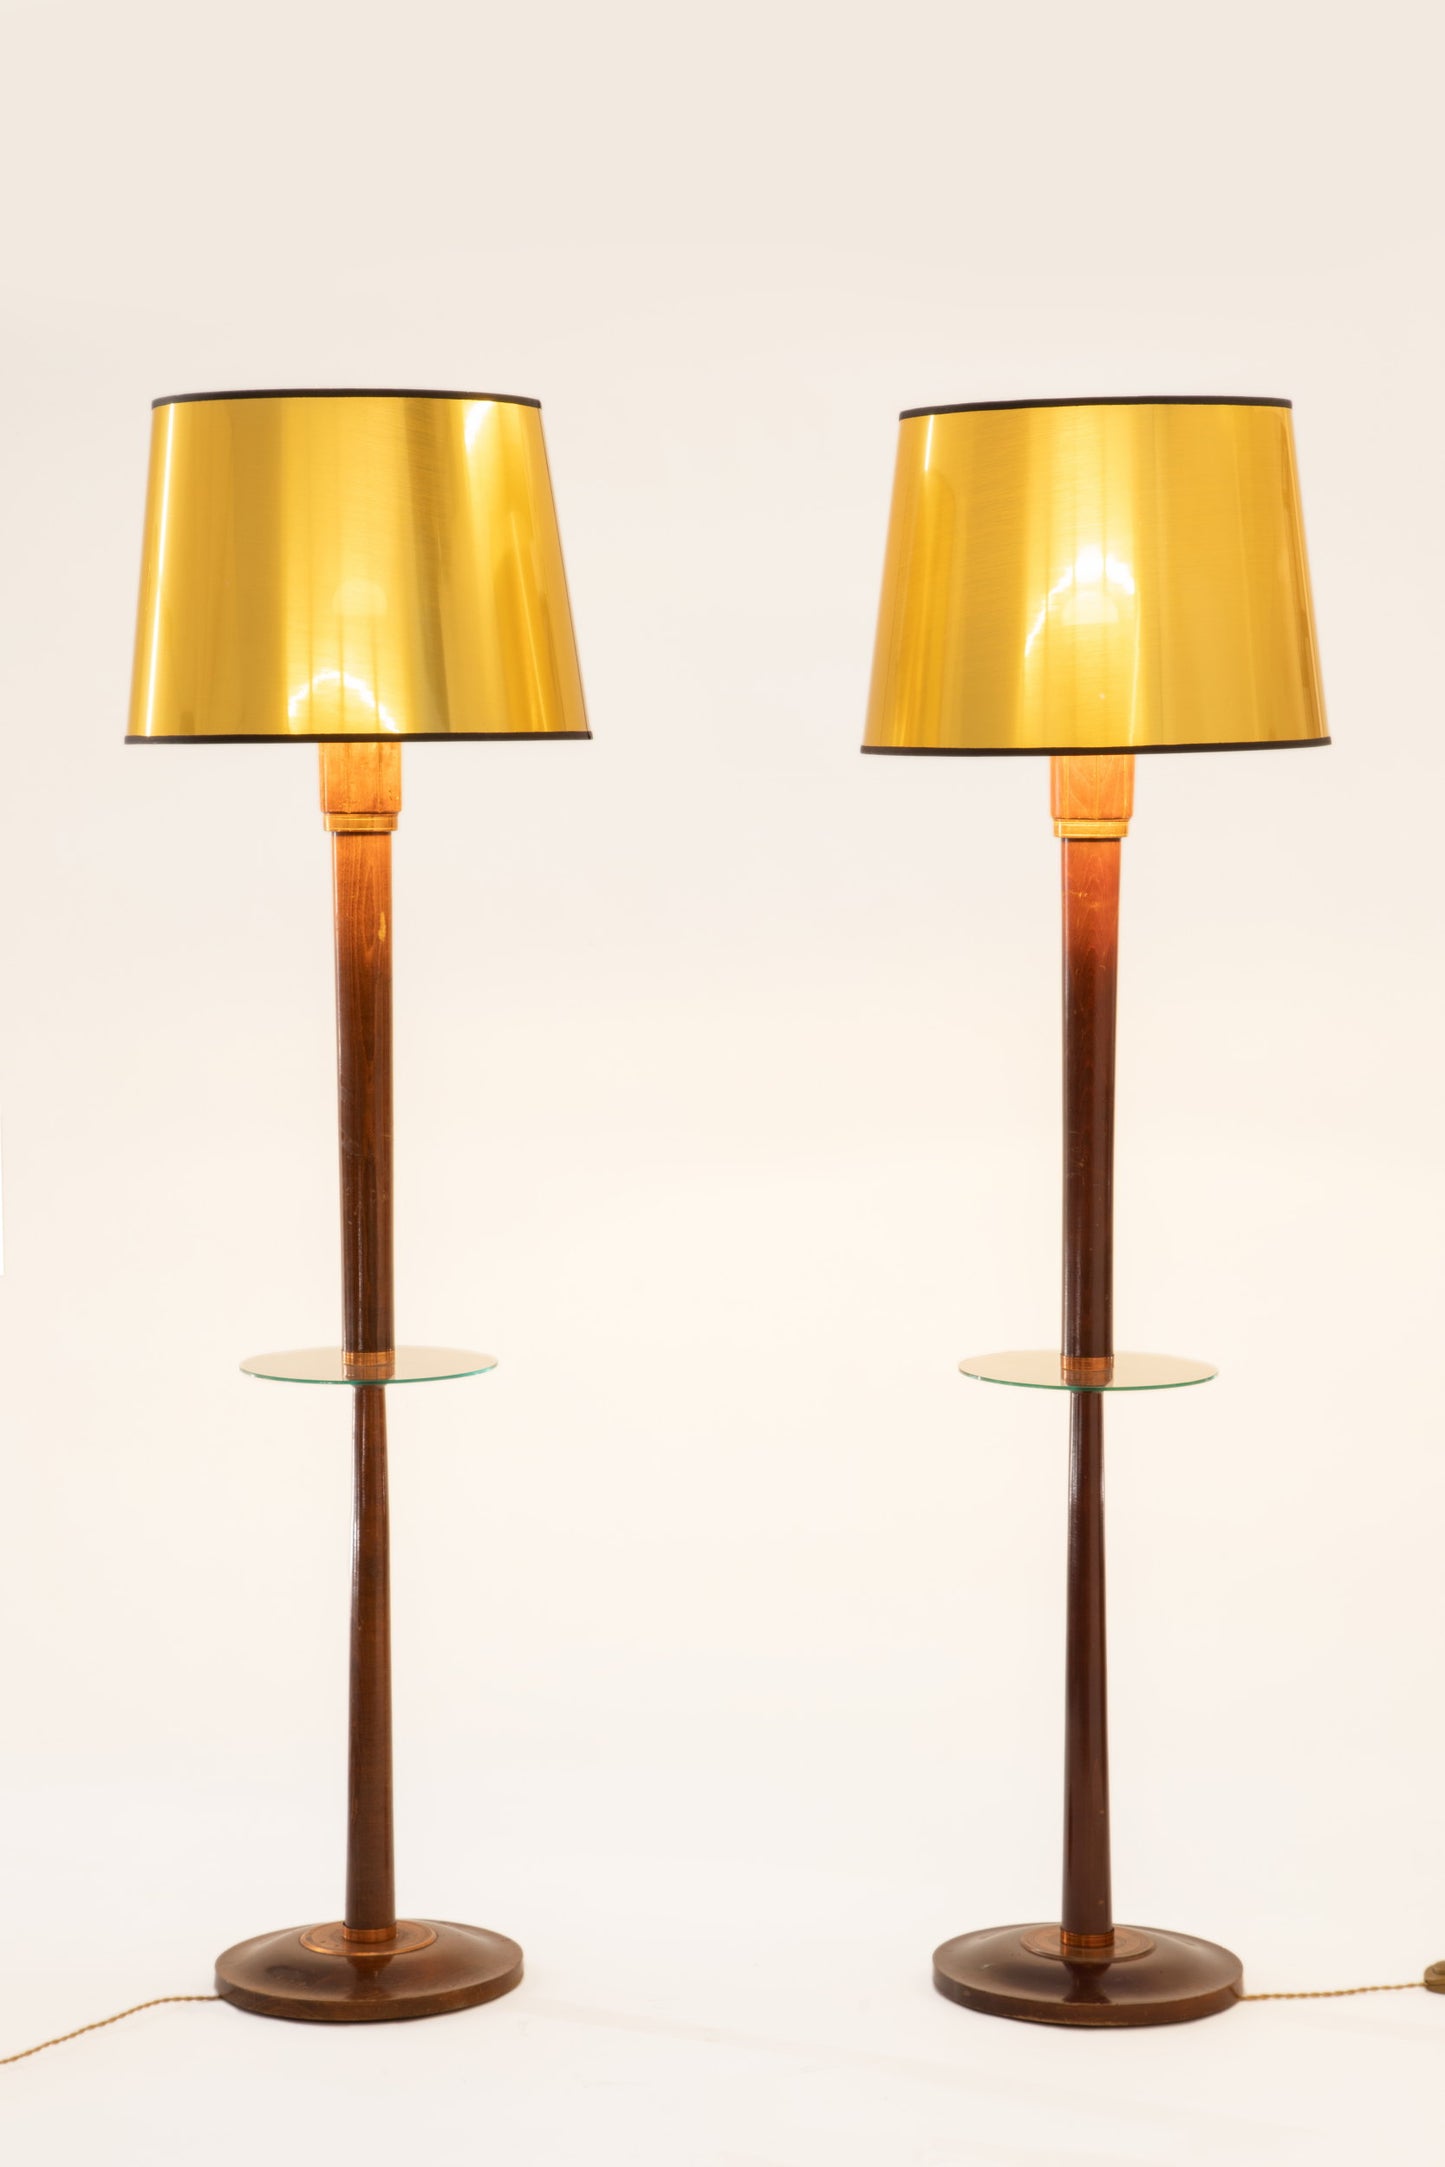 Pair of floor lamps from the 50s